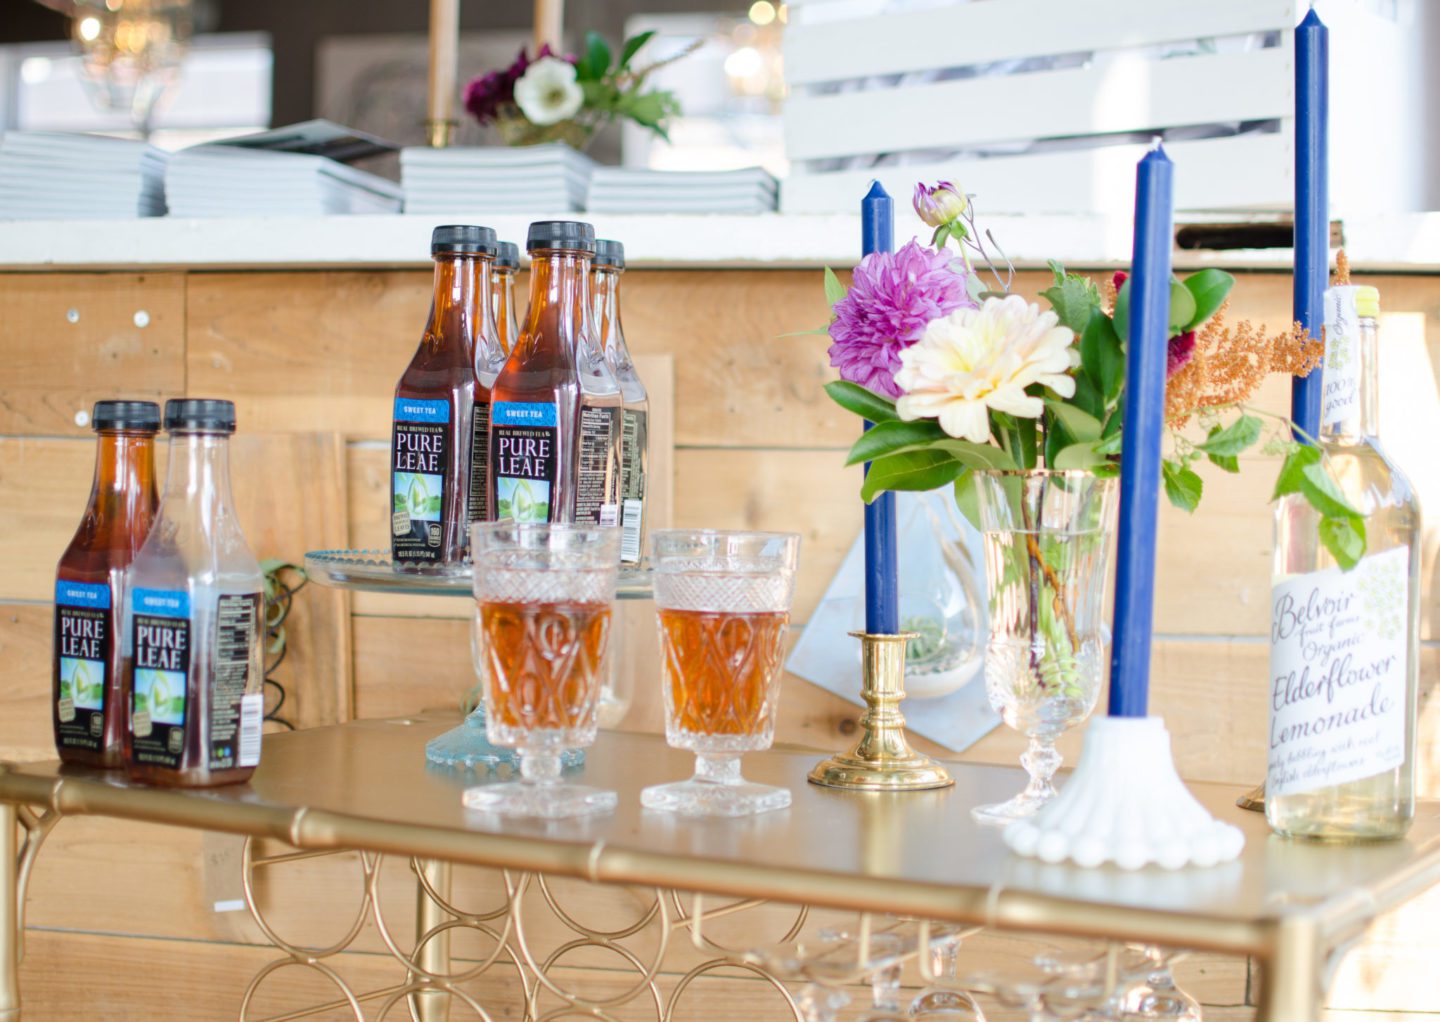 Hosting a Sweet Tea Party in Style - Powered by Pure Leaf Iced Tea 6